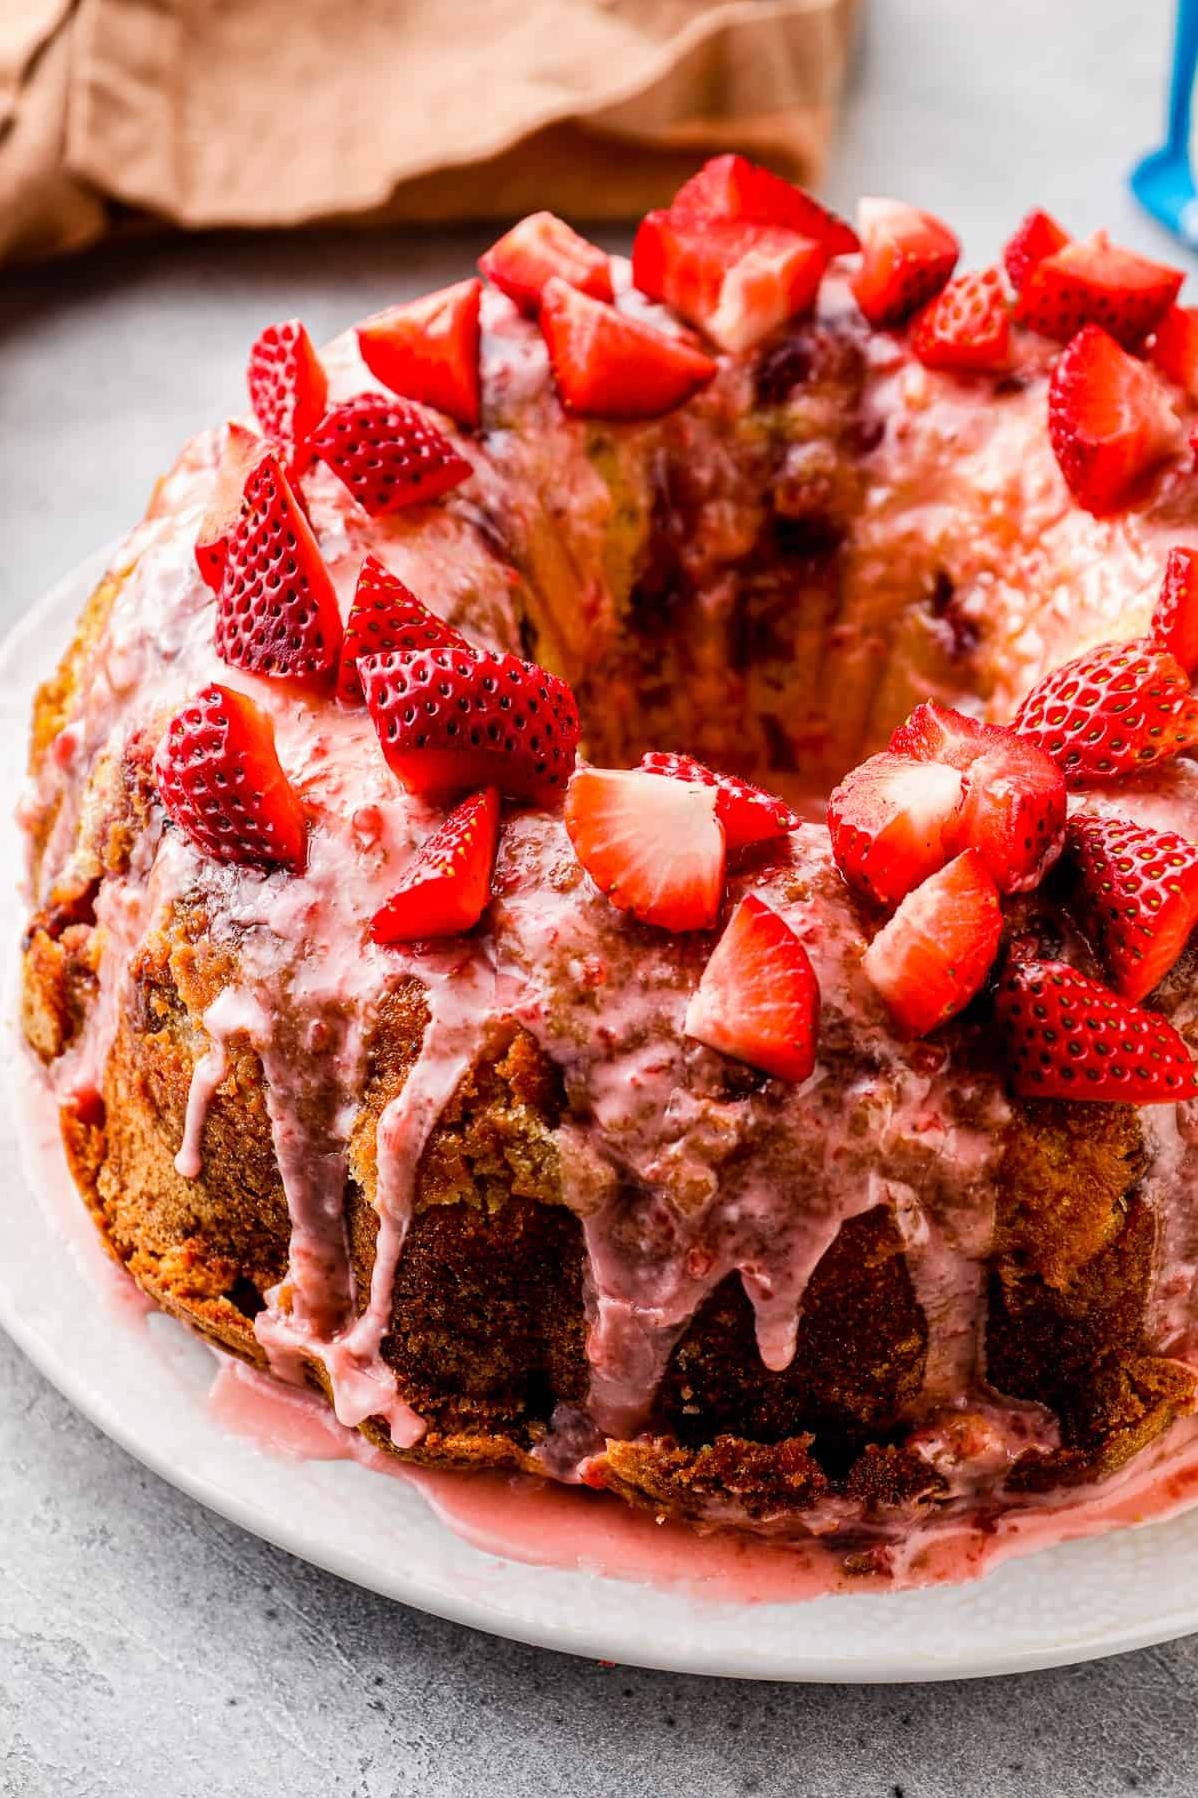  My heart beets wildly for this strawberry cake!